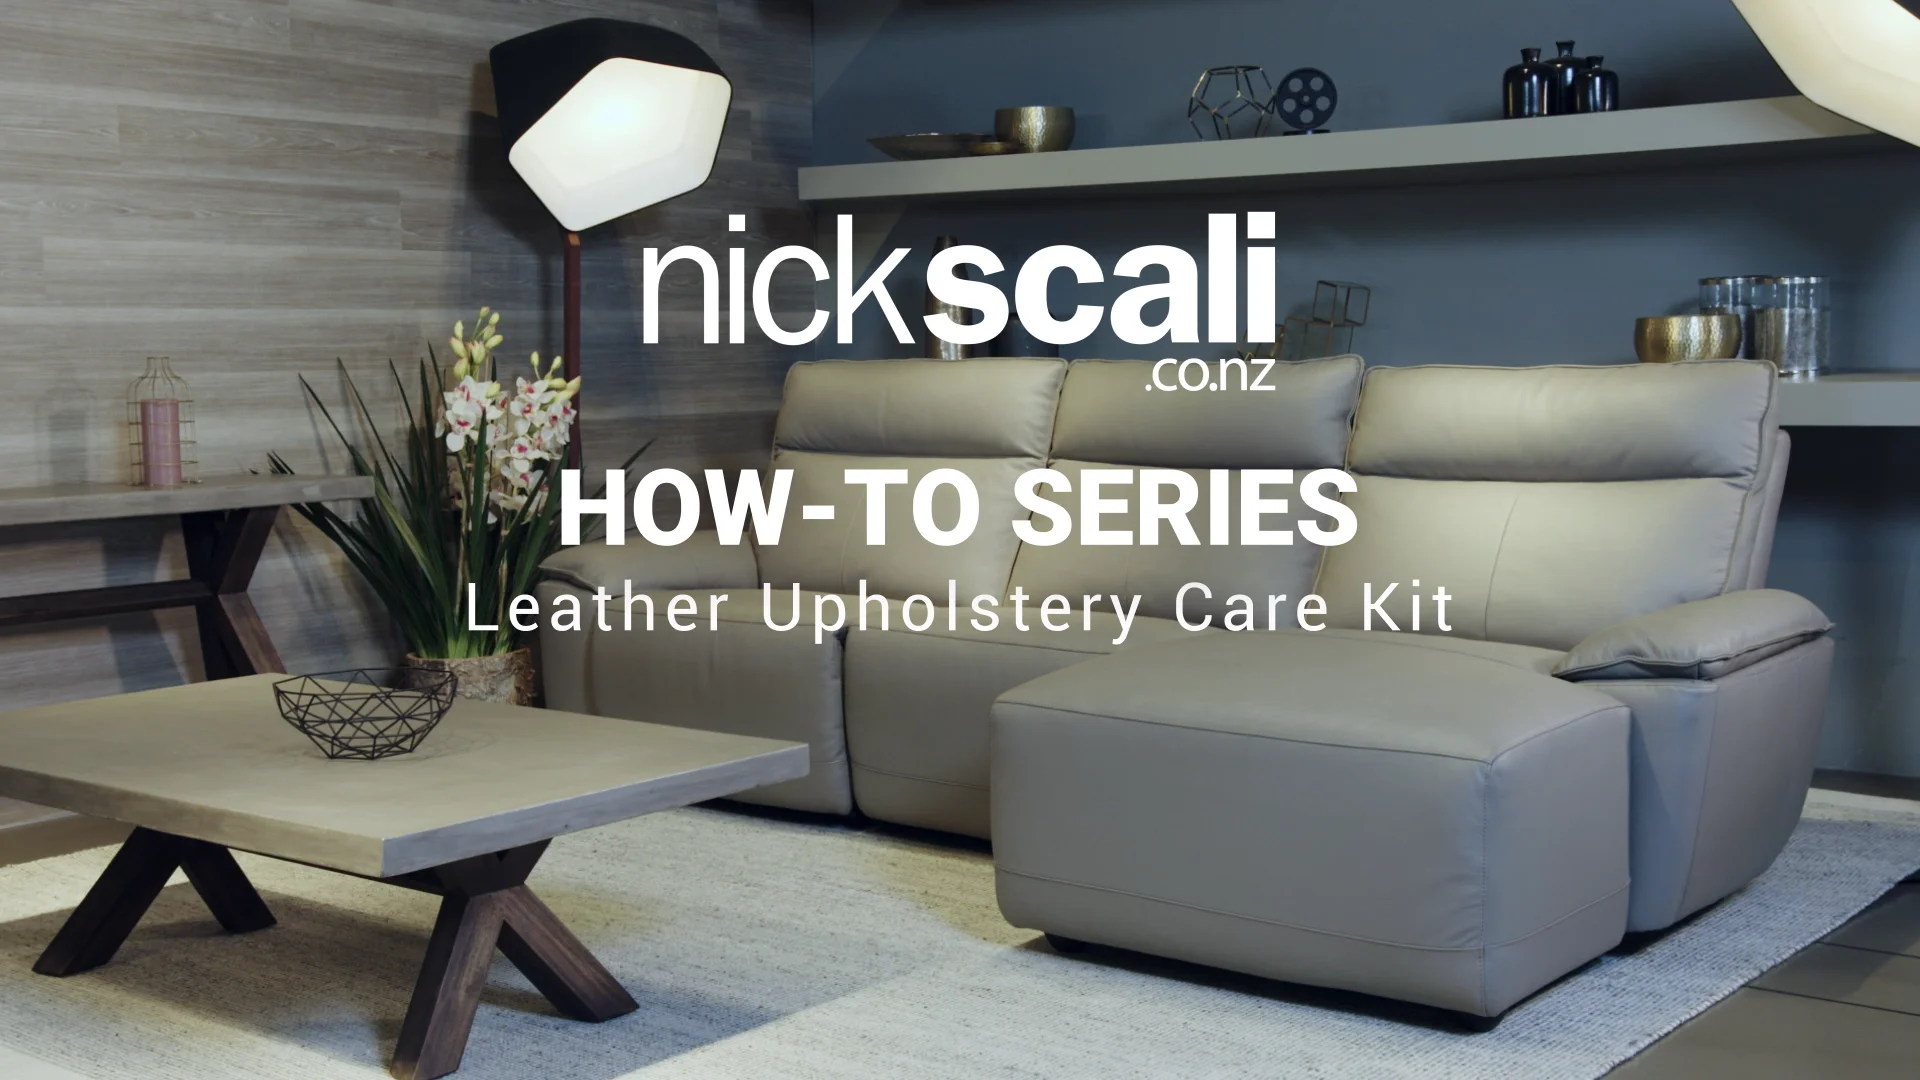 Application Video: New Leather Care Kit